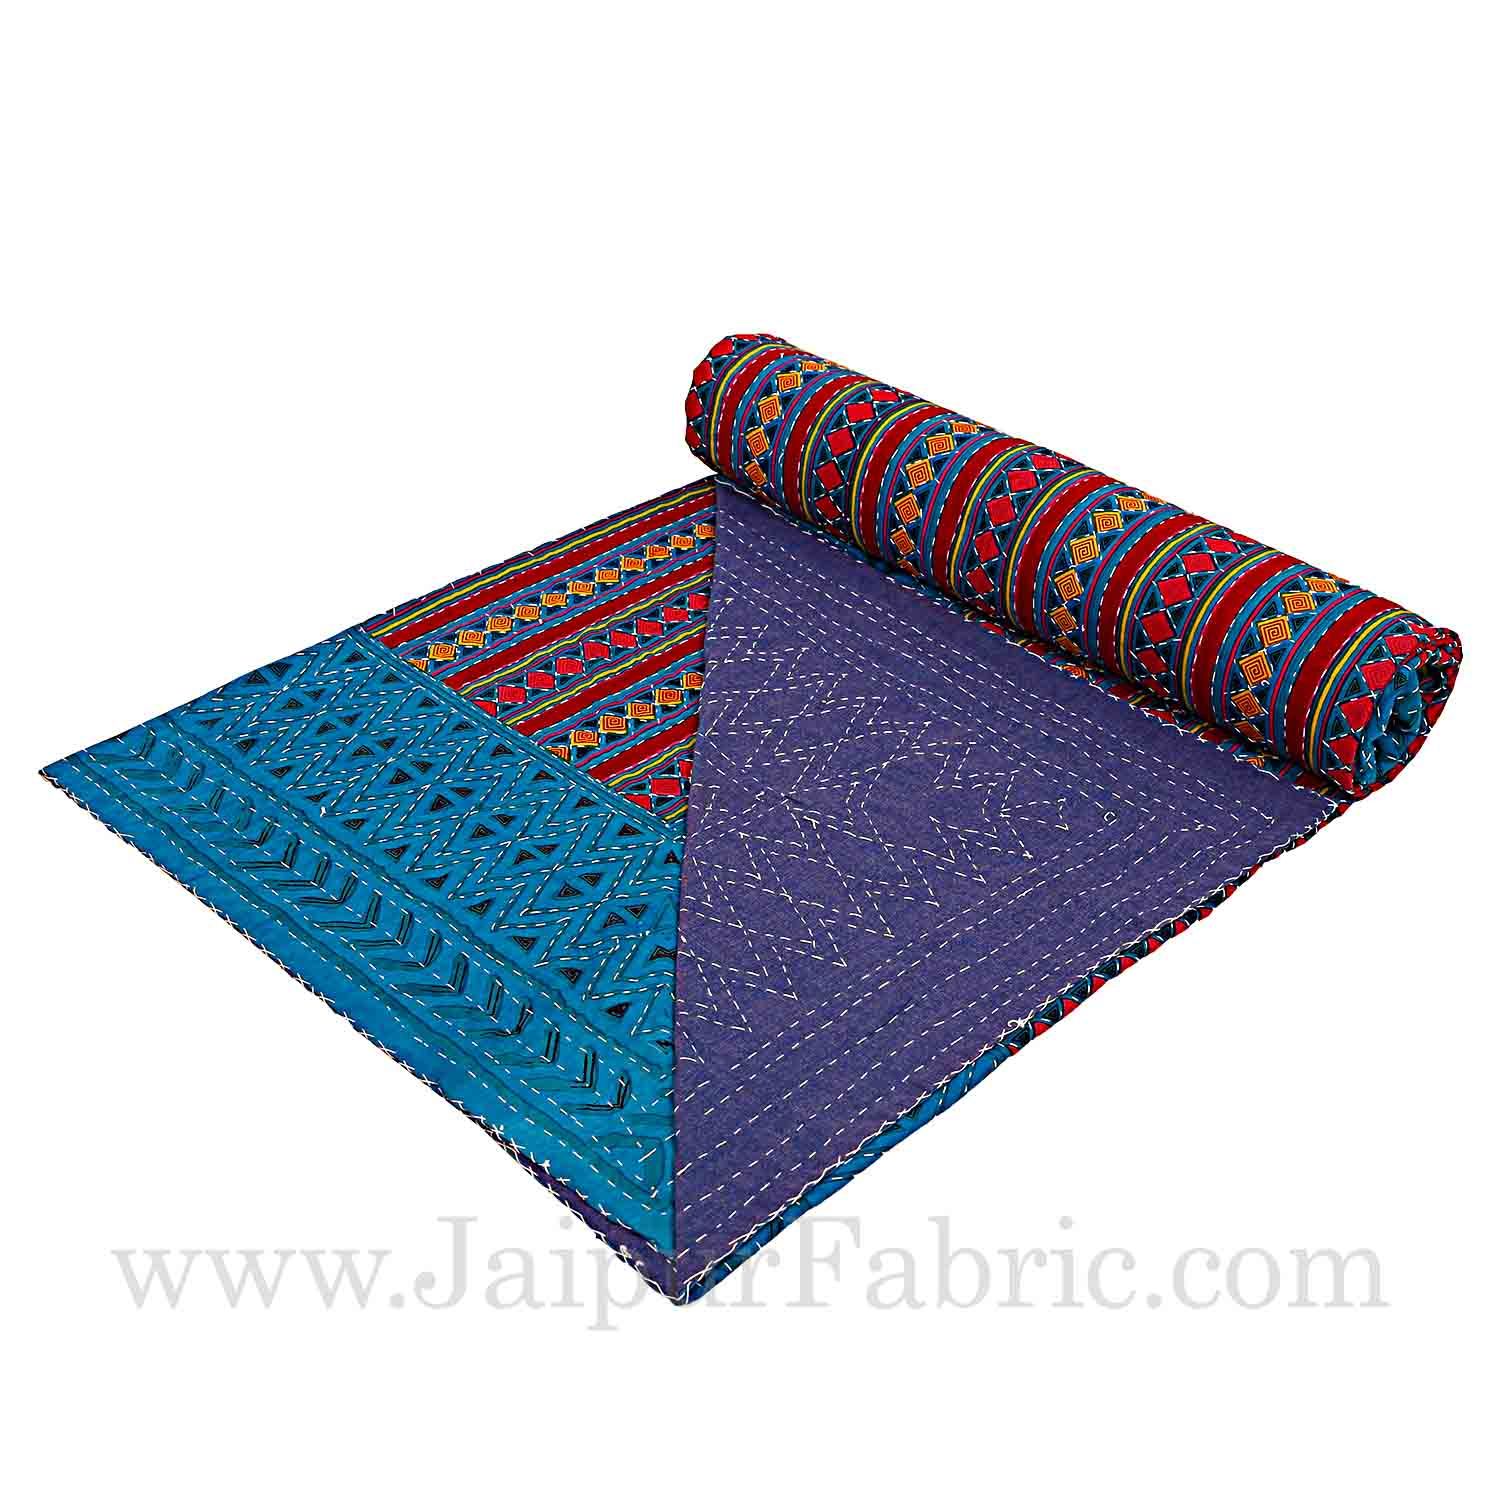 Blue  Border Maroon And blue Zig Zag Pattern With Thread Handwork(Kantha) Gudri ( Bed Cover)